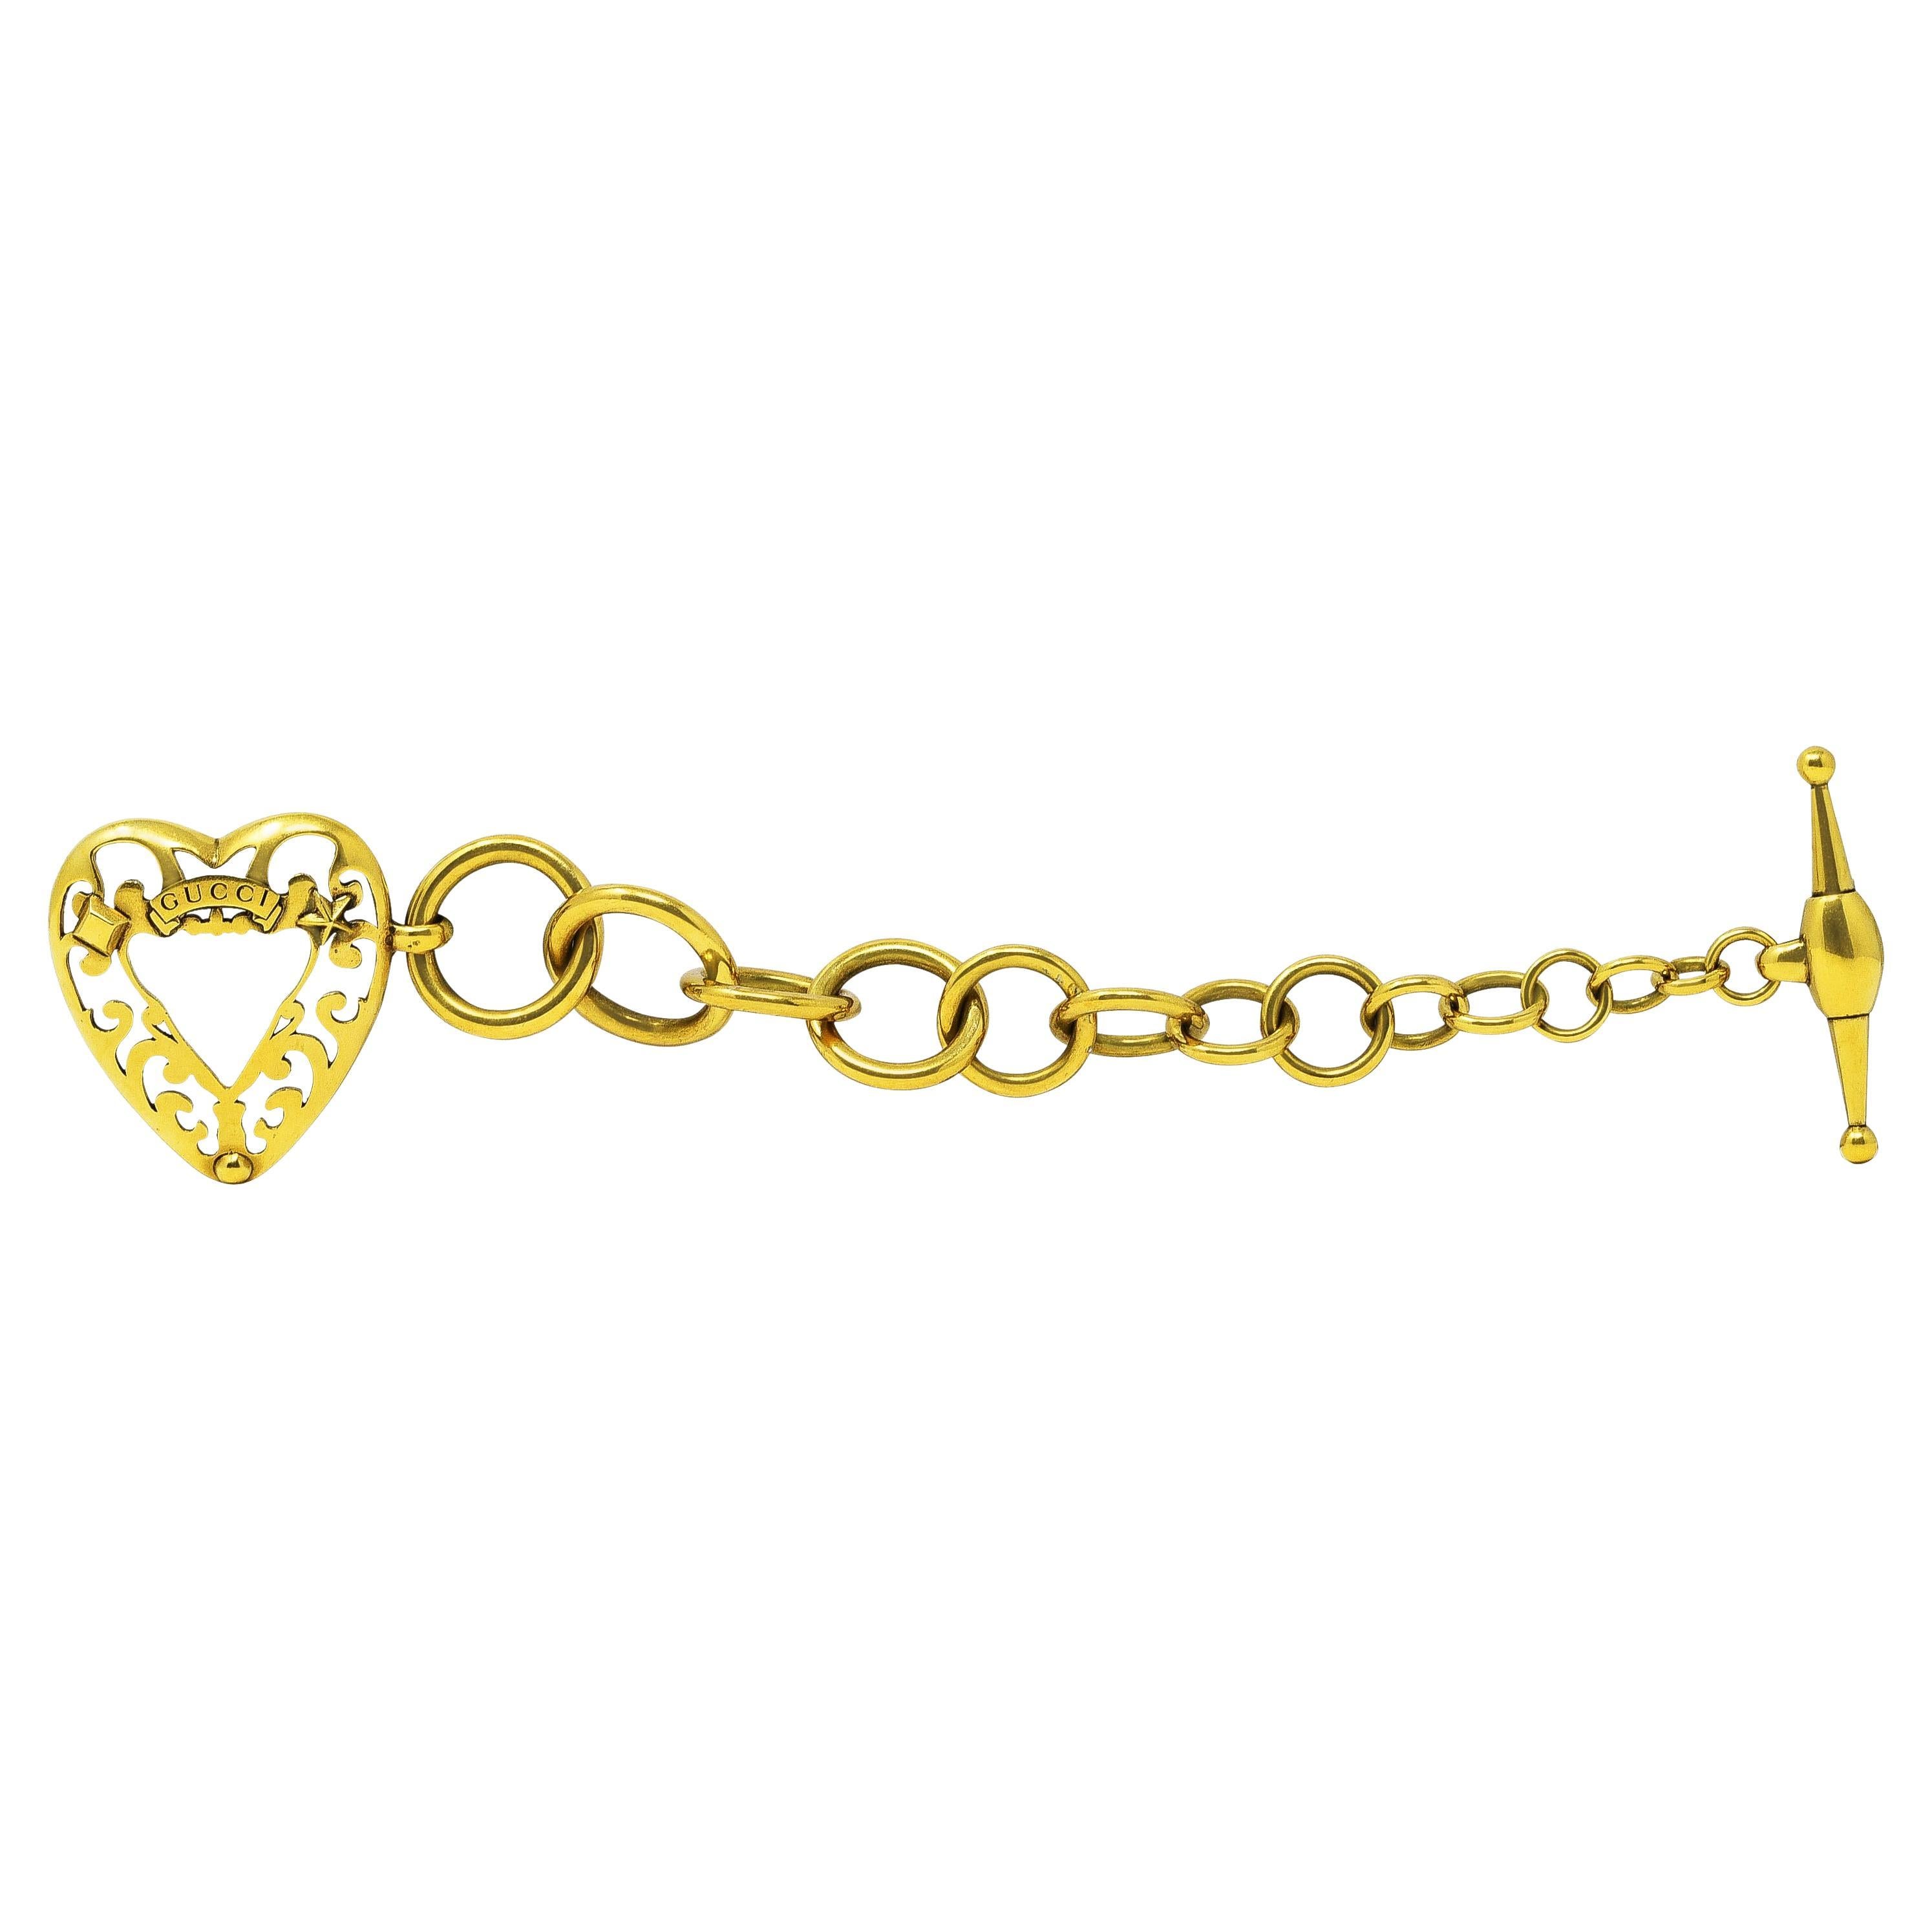 Toggle bracelet is comprised of round circular links that graduate in size. Featuring an oversized open-heart charm. Pierced with scrollwork, emblazoned 'Gucci', and accented by star and stud motifs. Completed by an oversized toggle bar. Italian